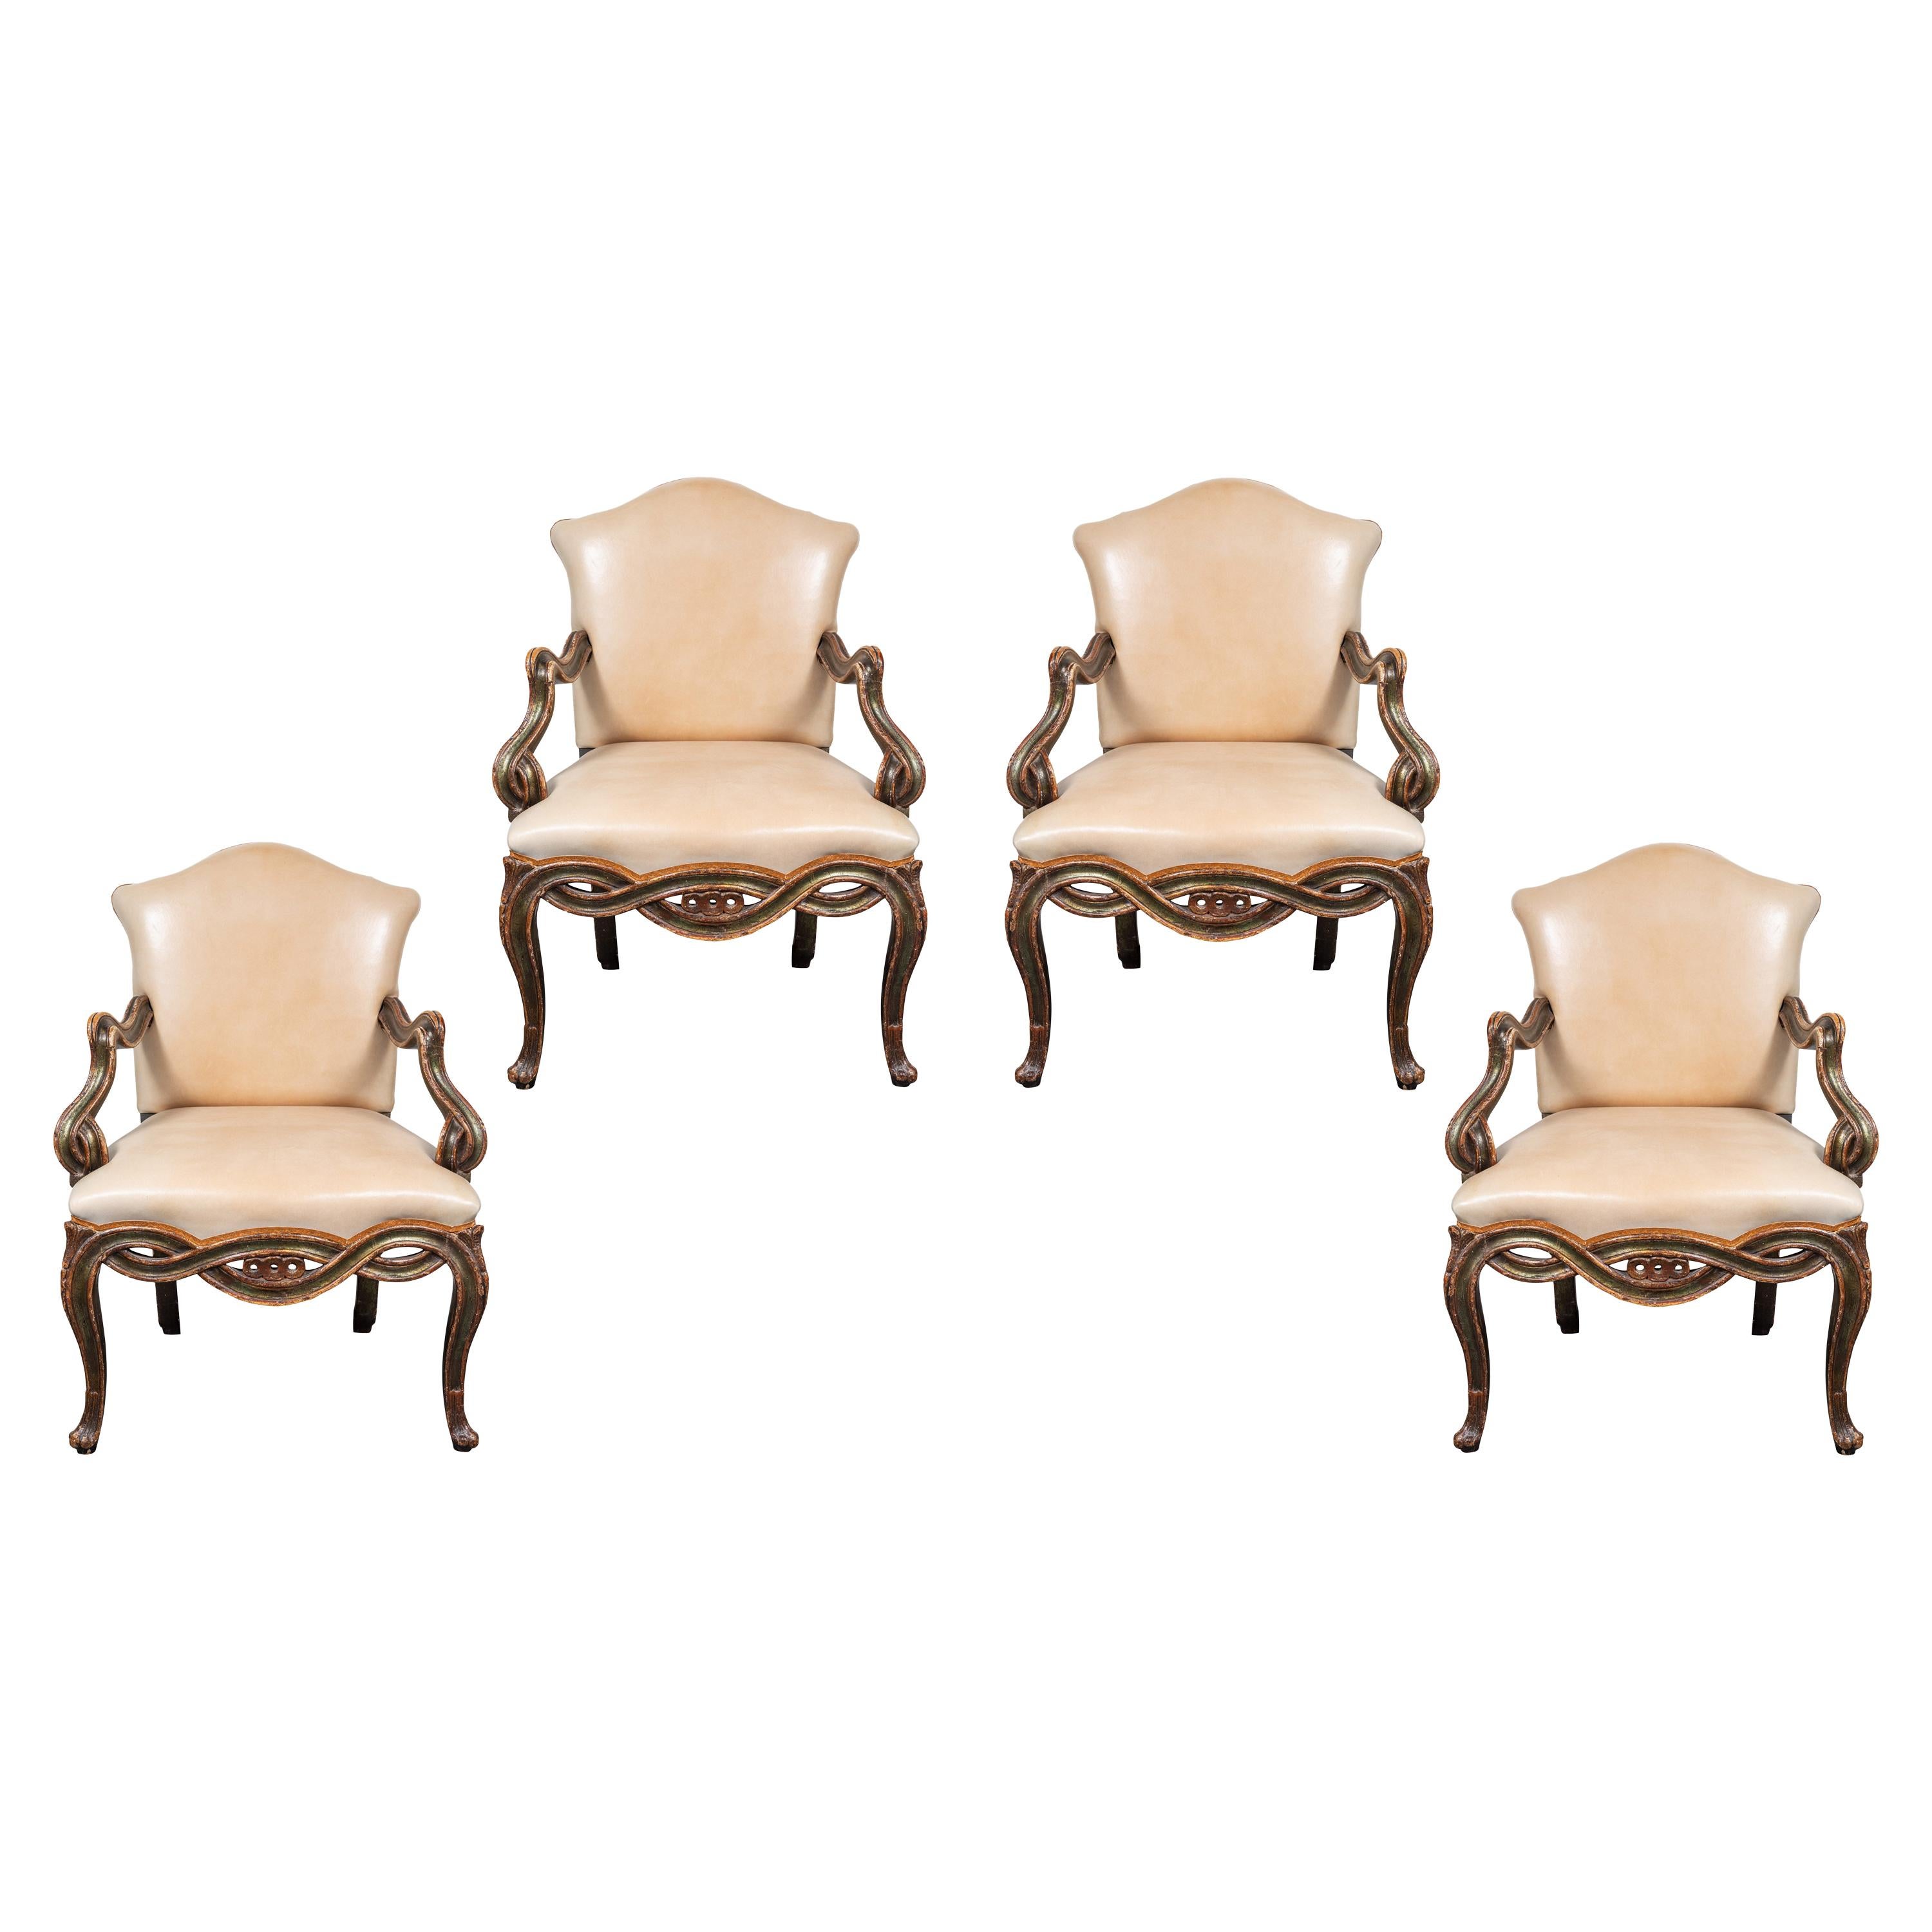 Suite of Antique, Painted, Venetian Chairs